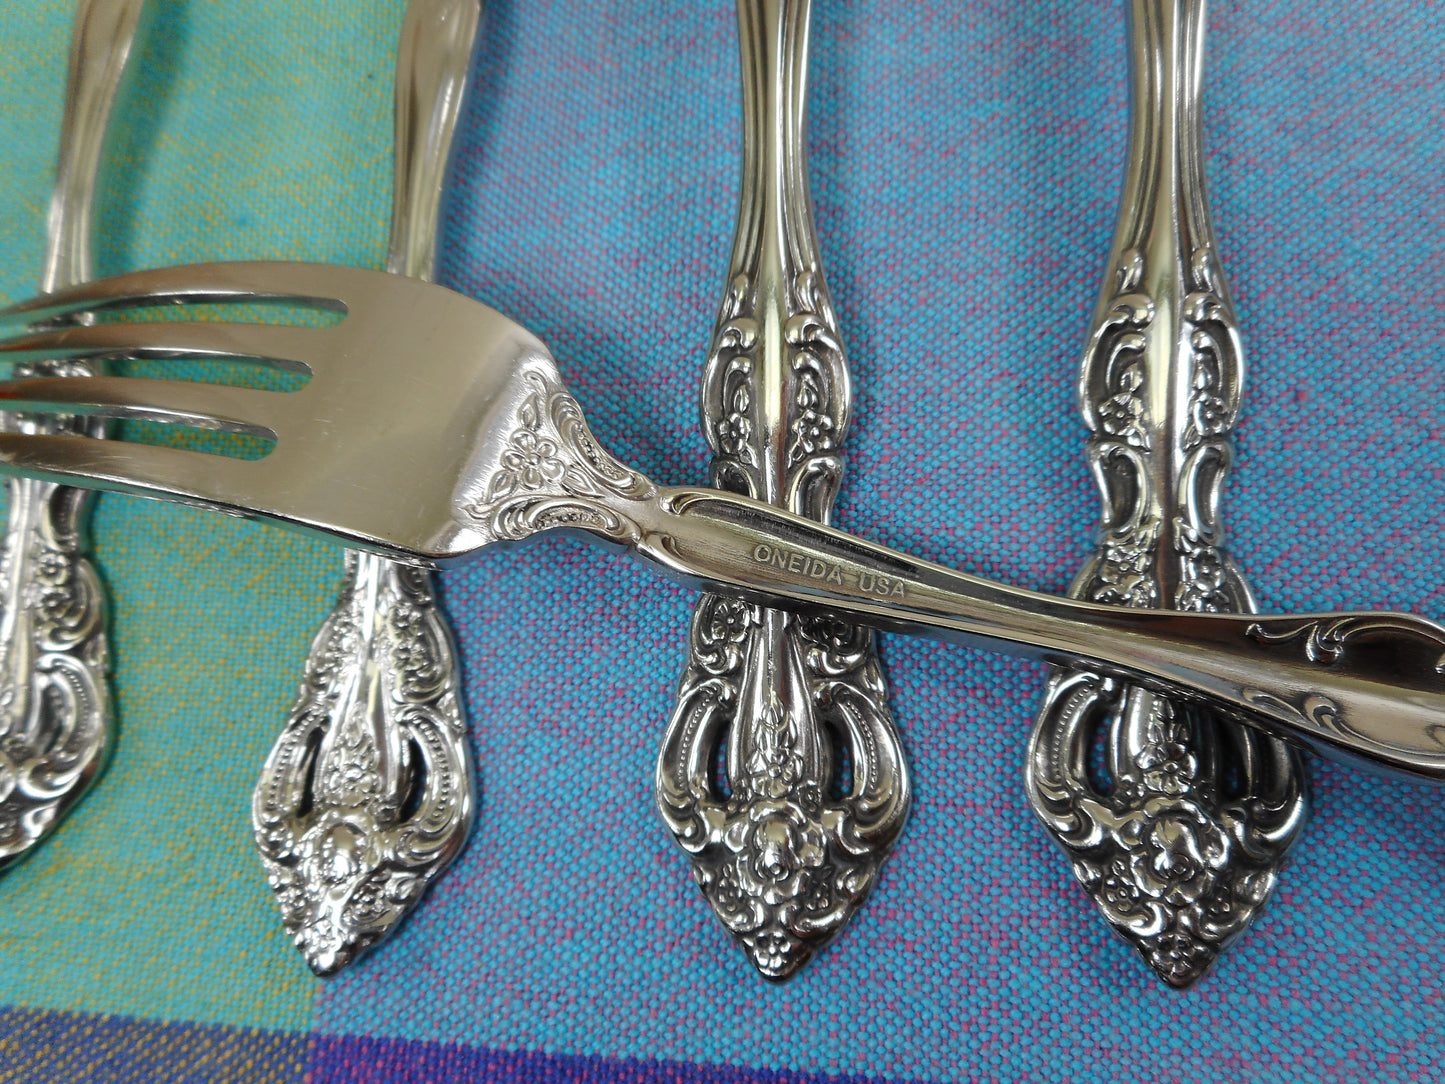 Oneida USA Michelangelo Stainless Flatware - 11 Pieces Teaspoon Place Spoon Fork Knives Heritage